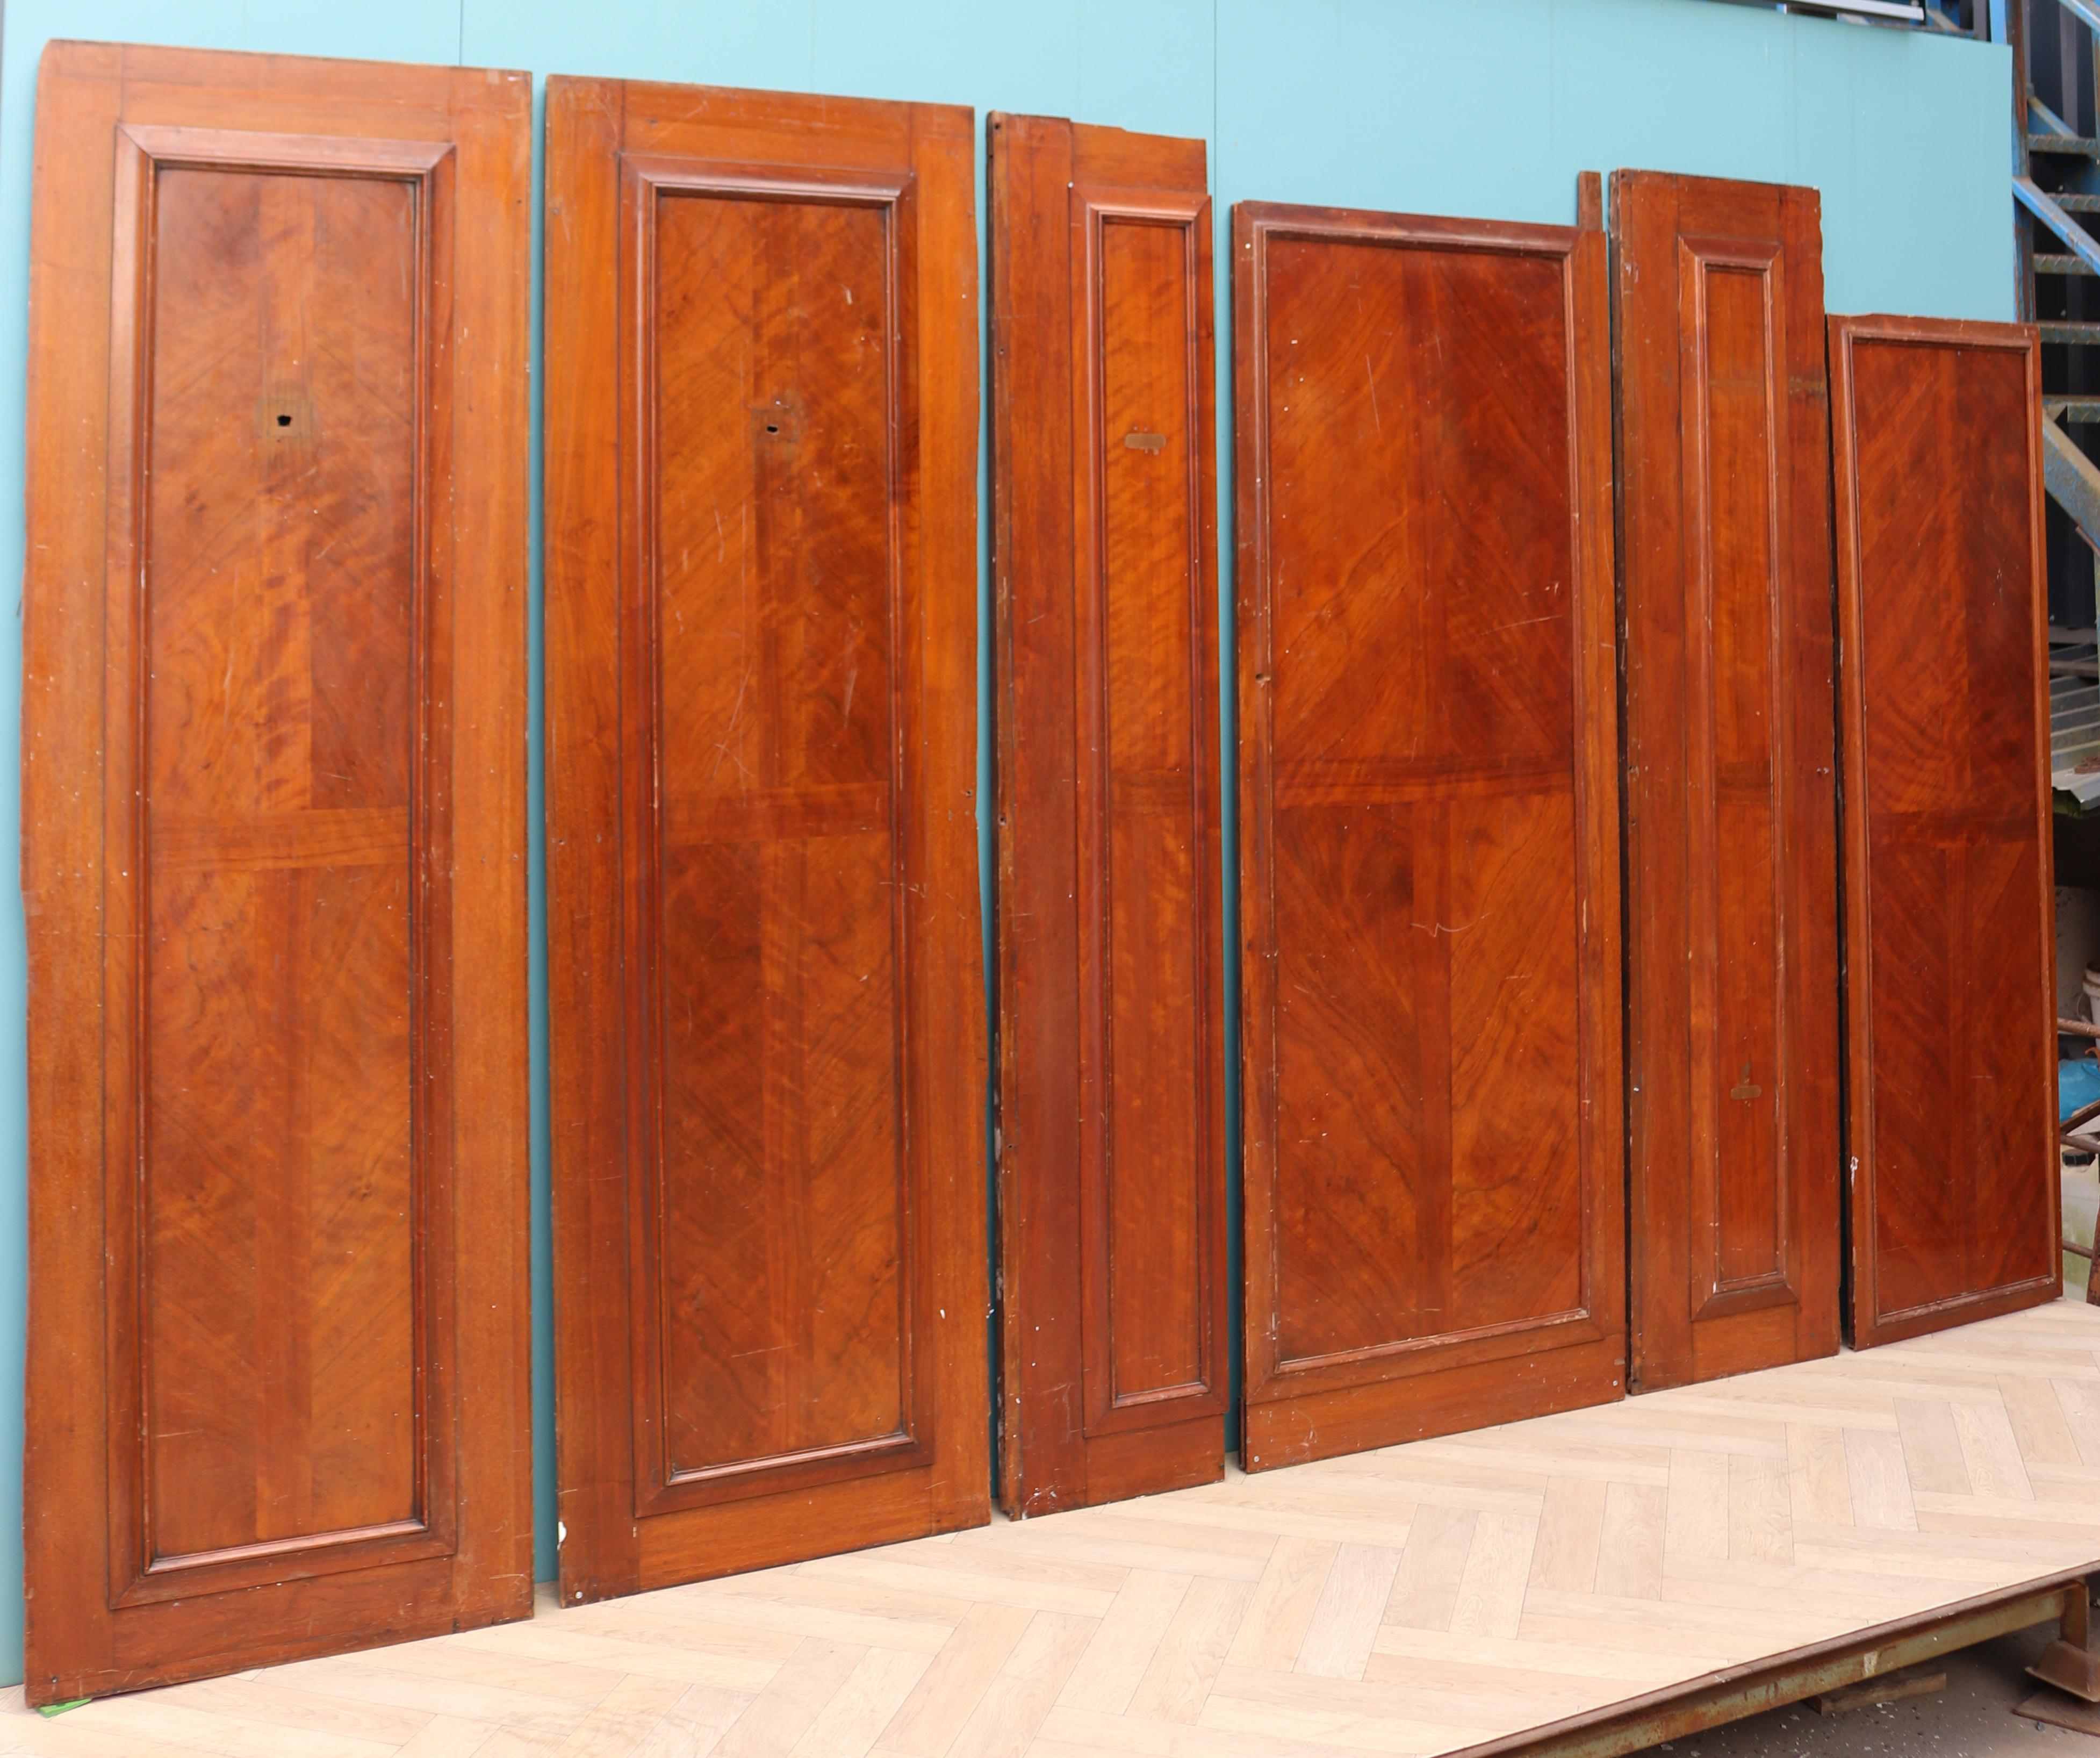 1920s panelling